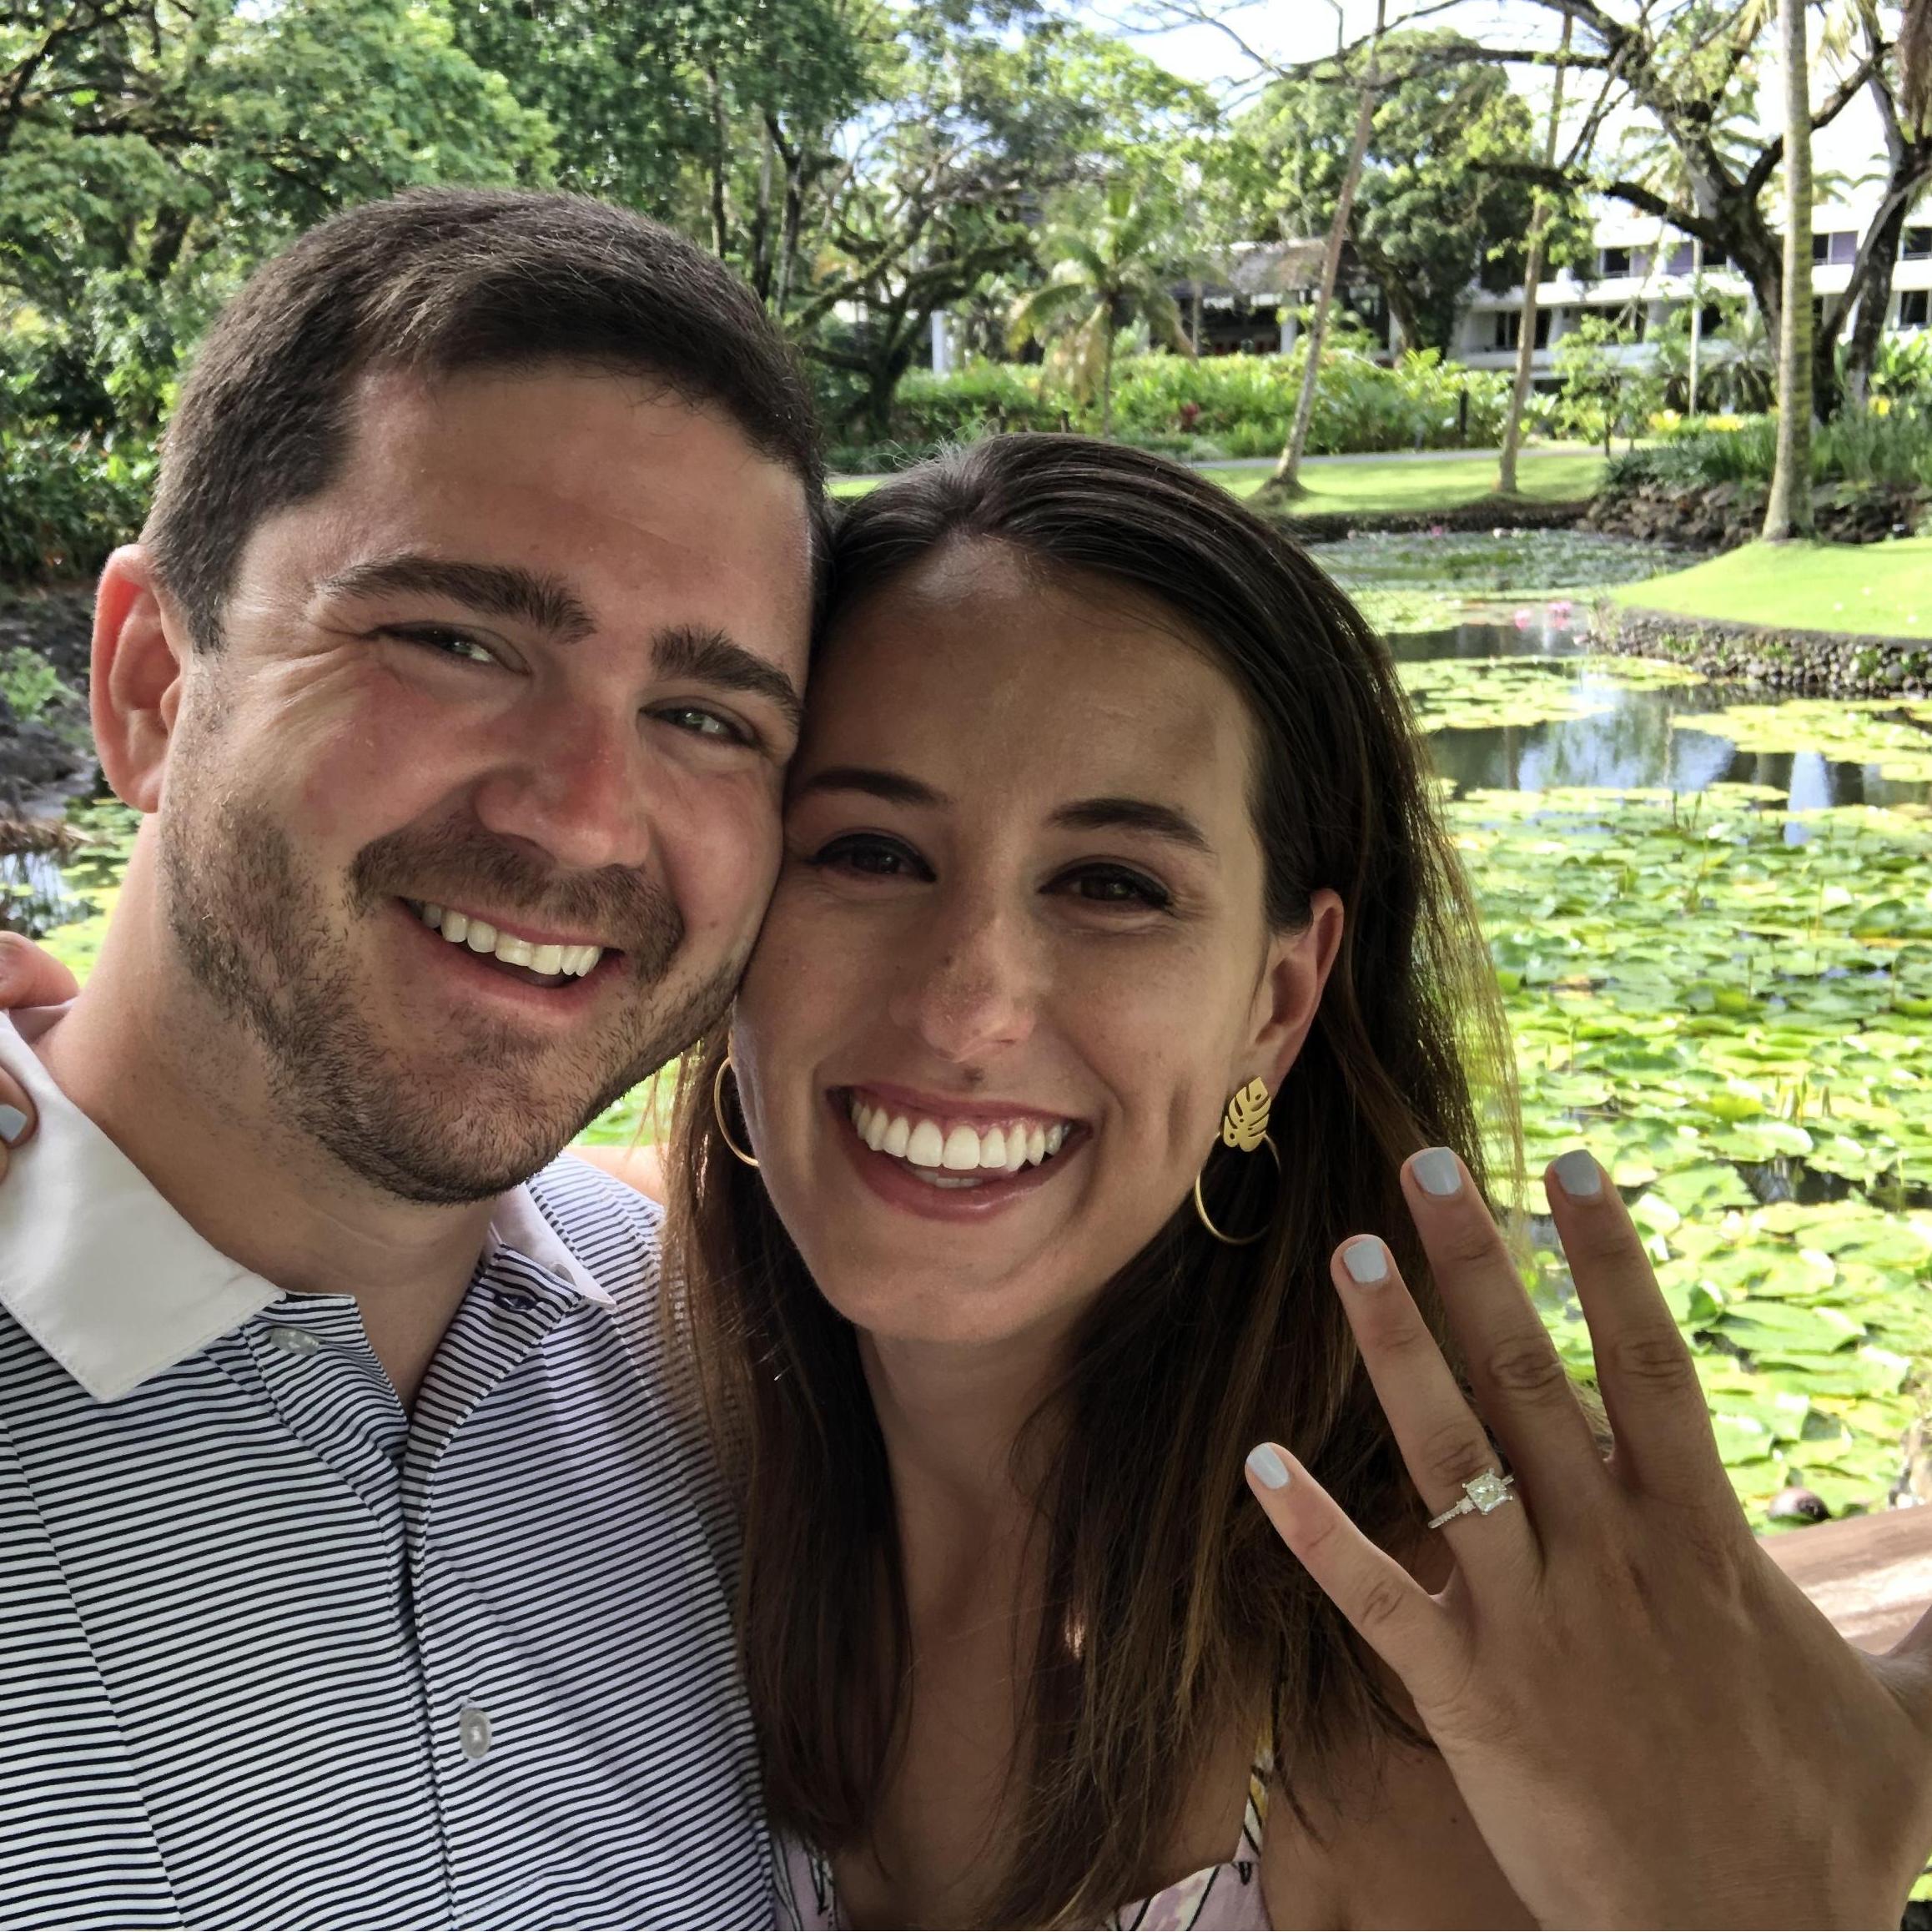 Engagement Day in Fiji - October 2019